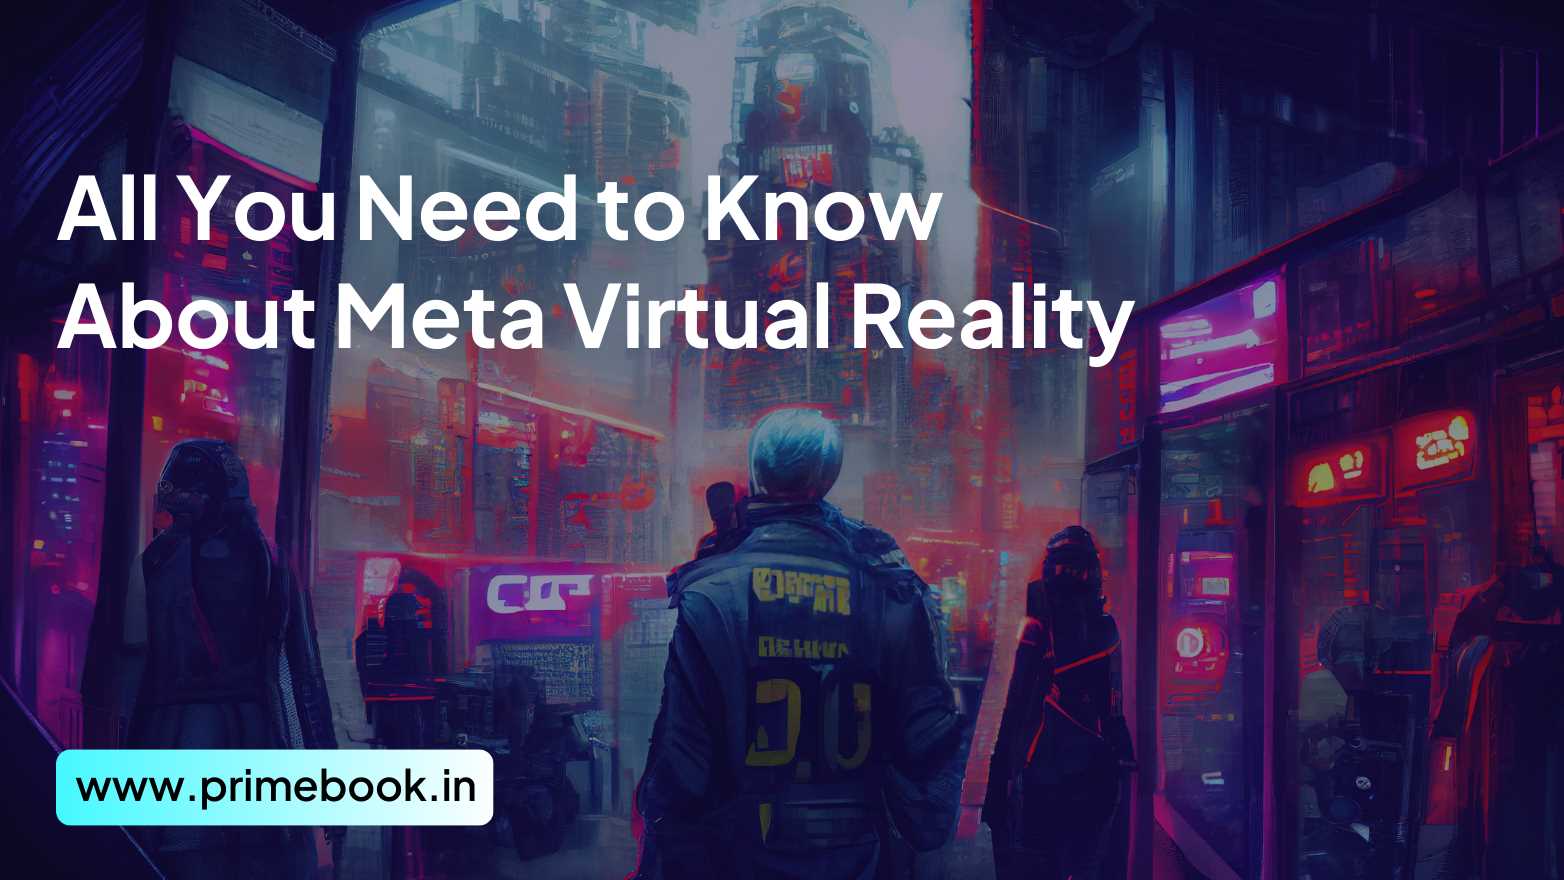 All You Need to Know About Meta Virtual Reality